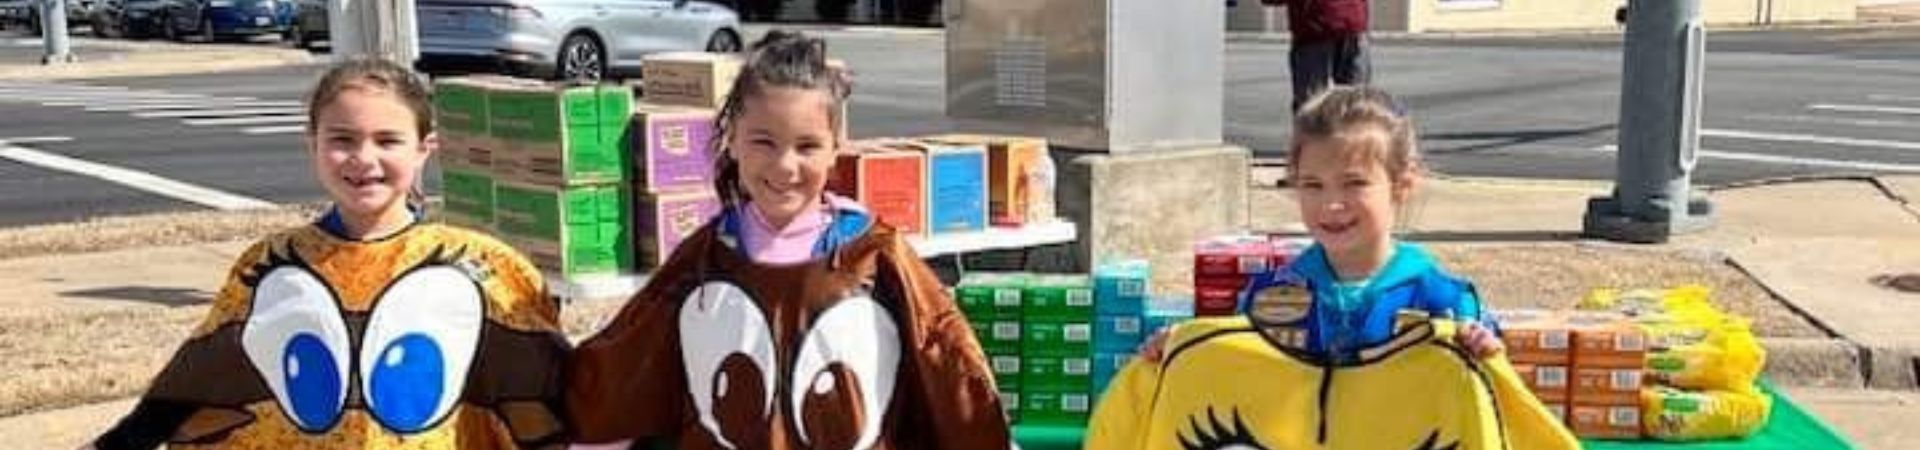  three girls at a Girl Scout cookie booth wearing cookie costumes 